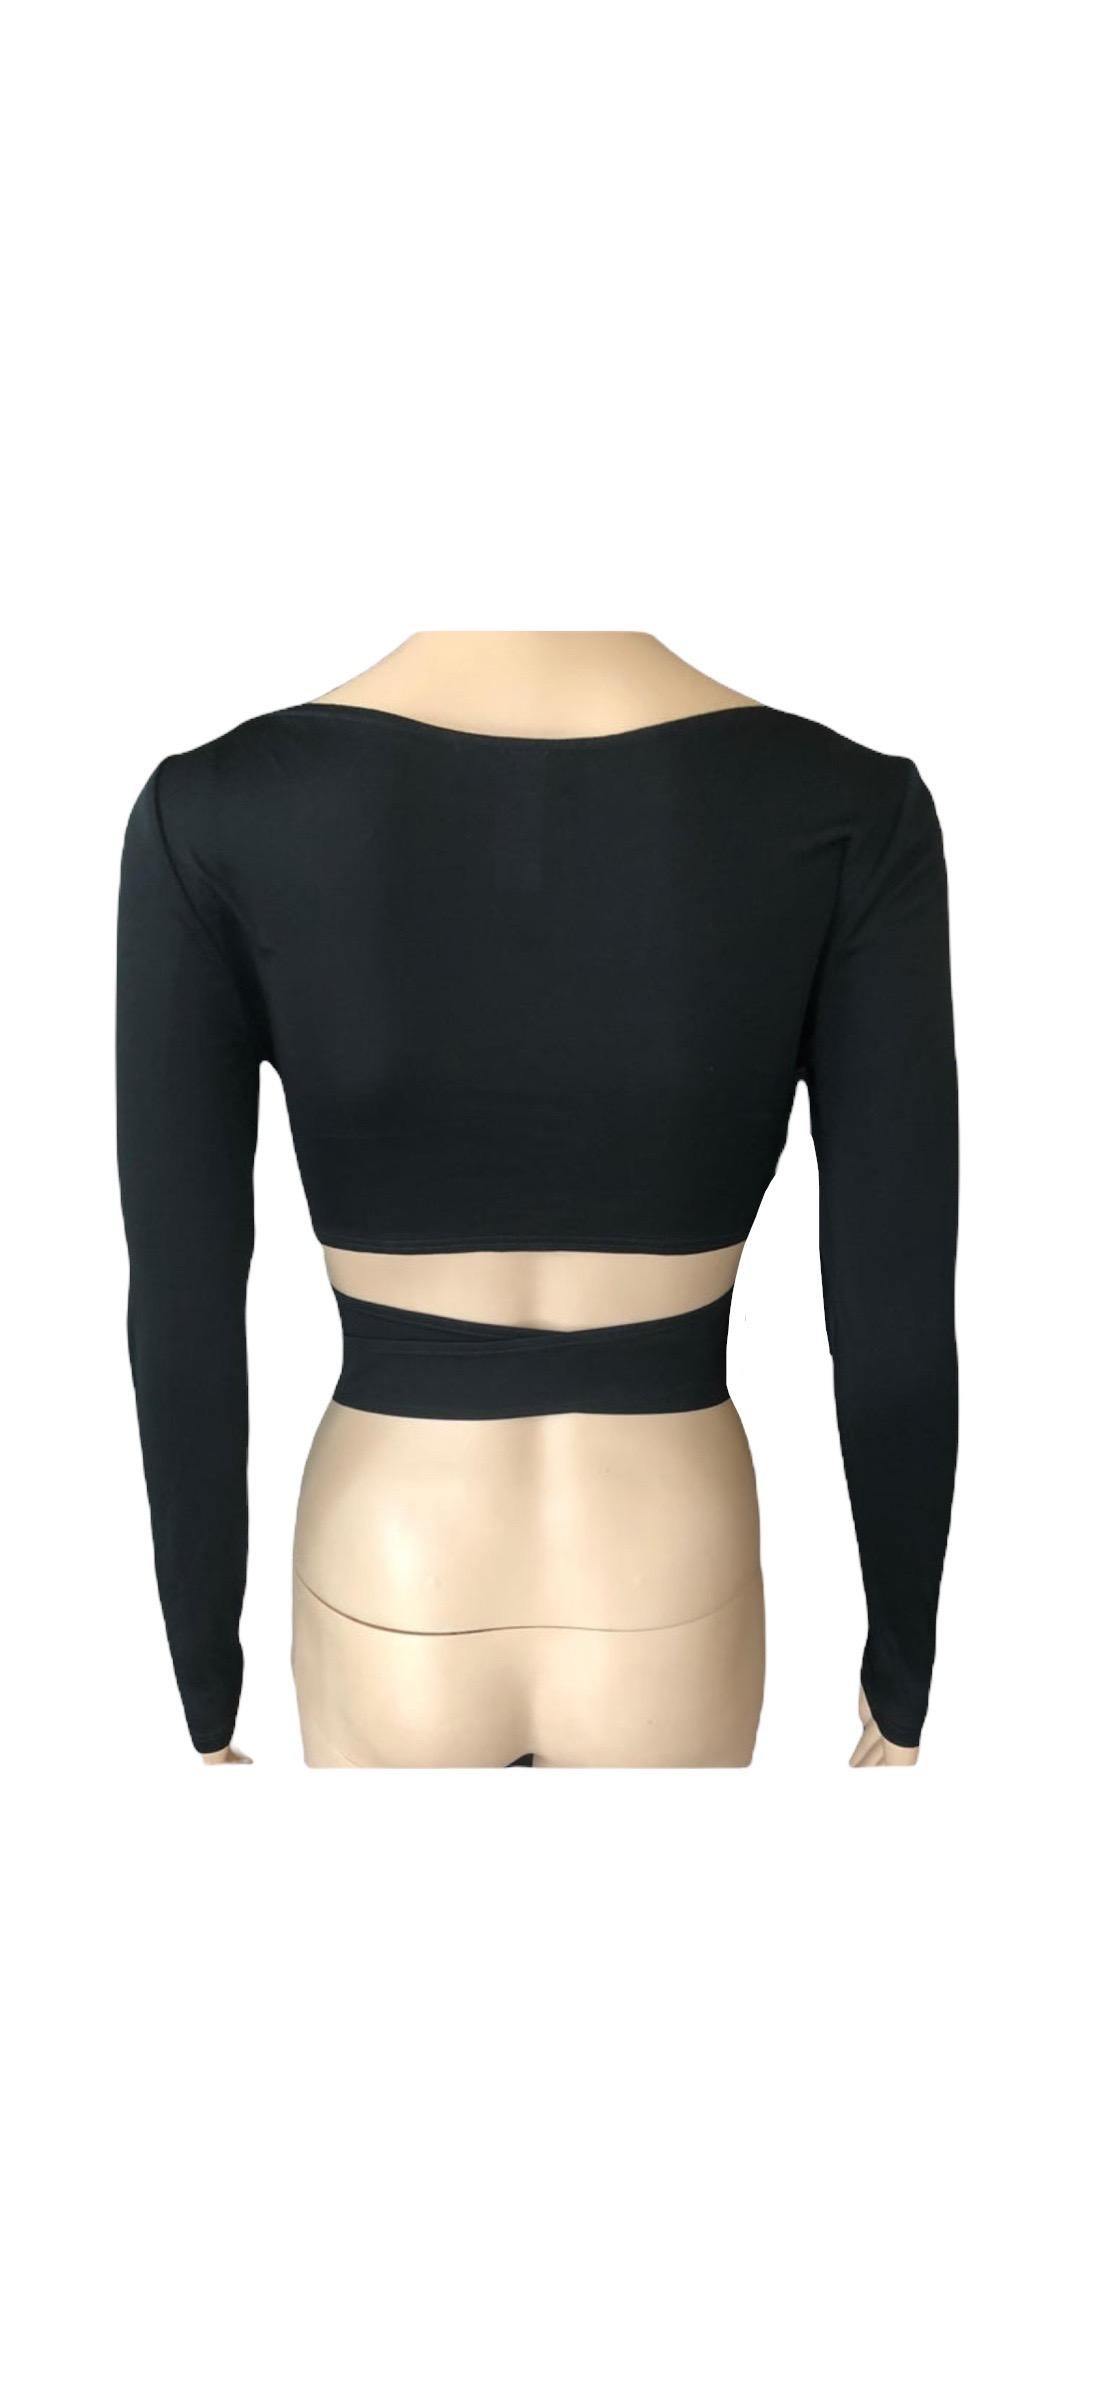 Versace S/S 2005 Embellished Belted Plunging Wrap Crop Top For Sale 7